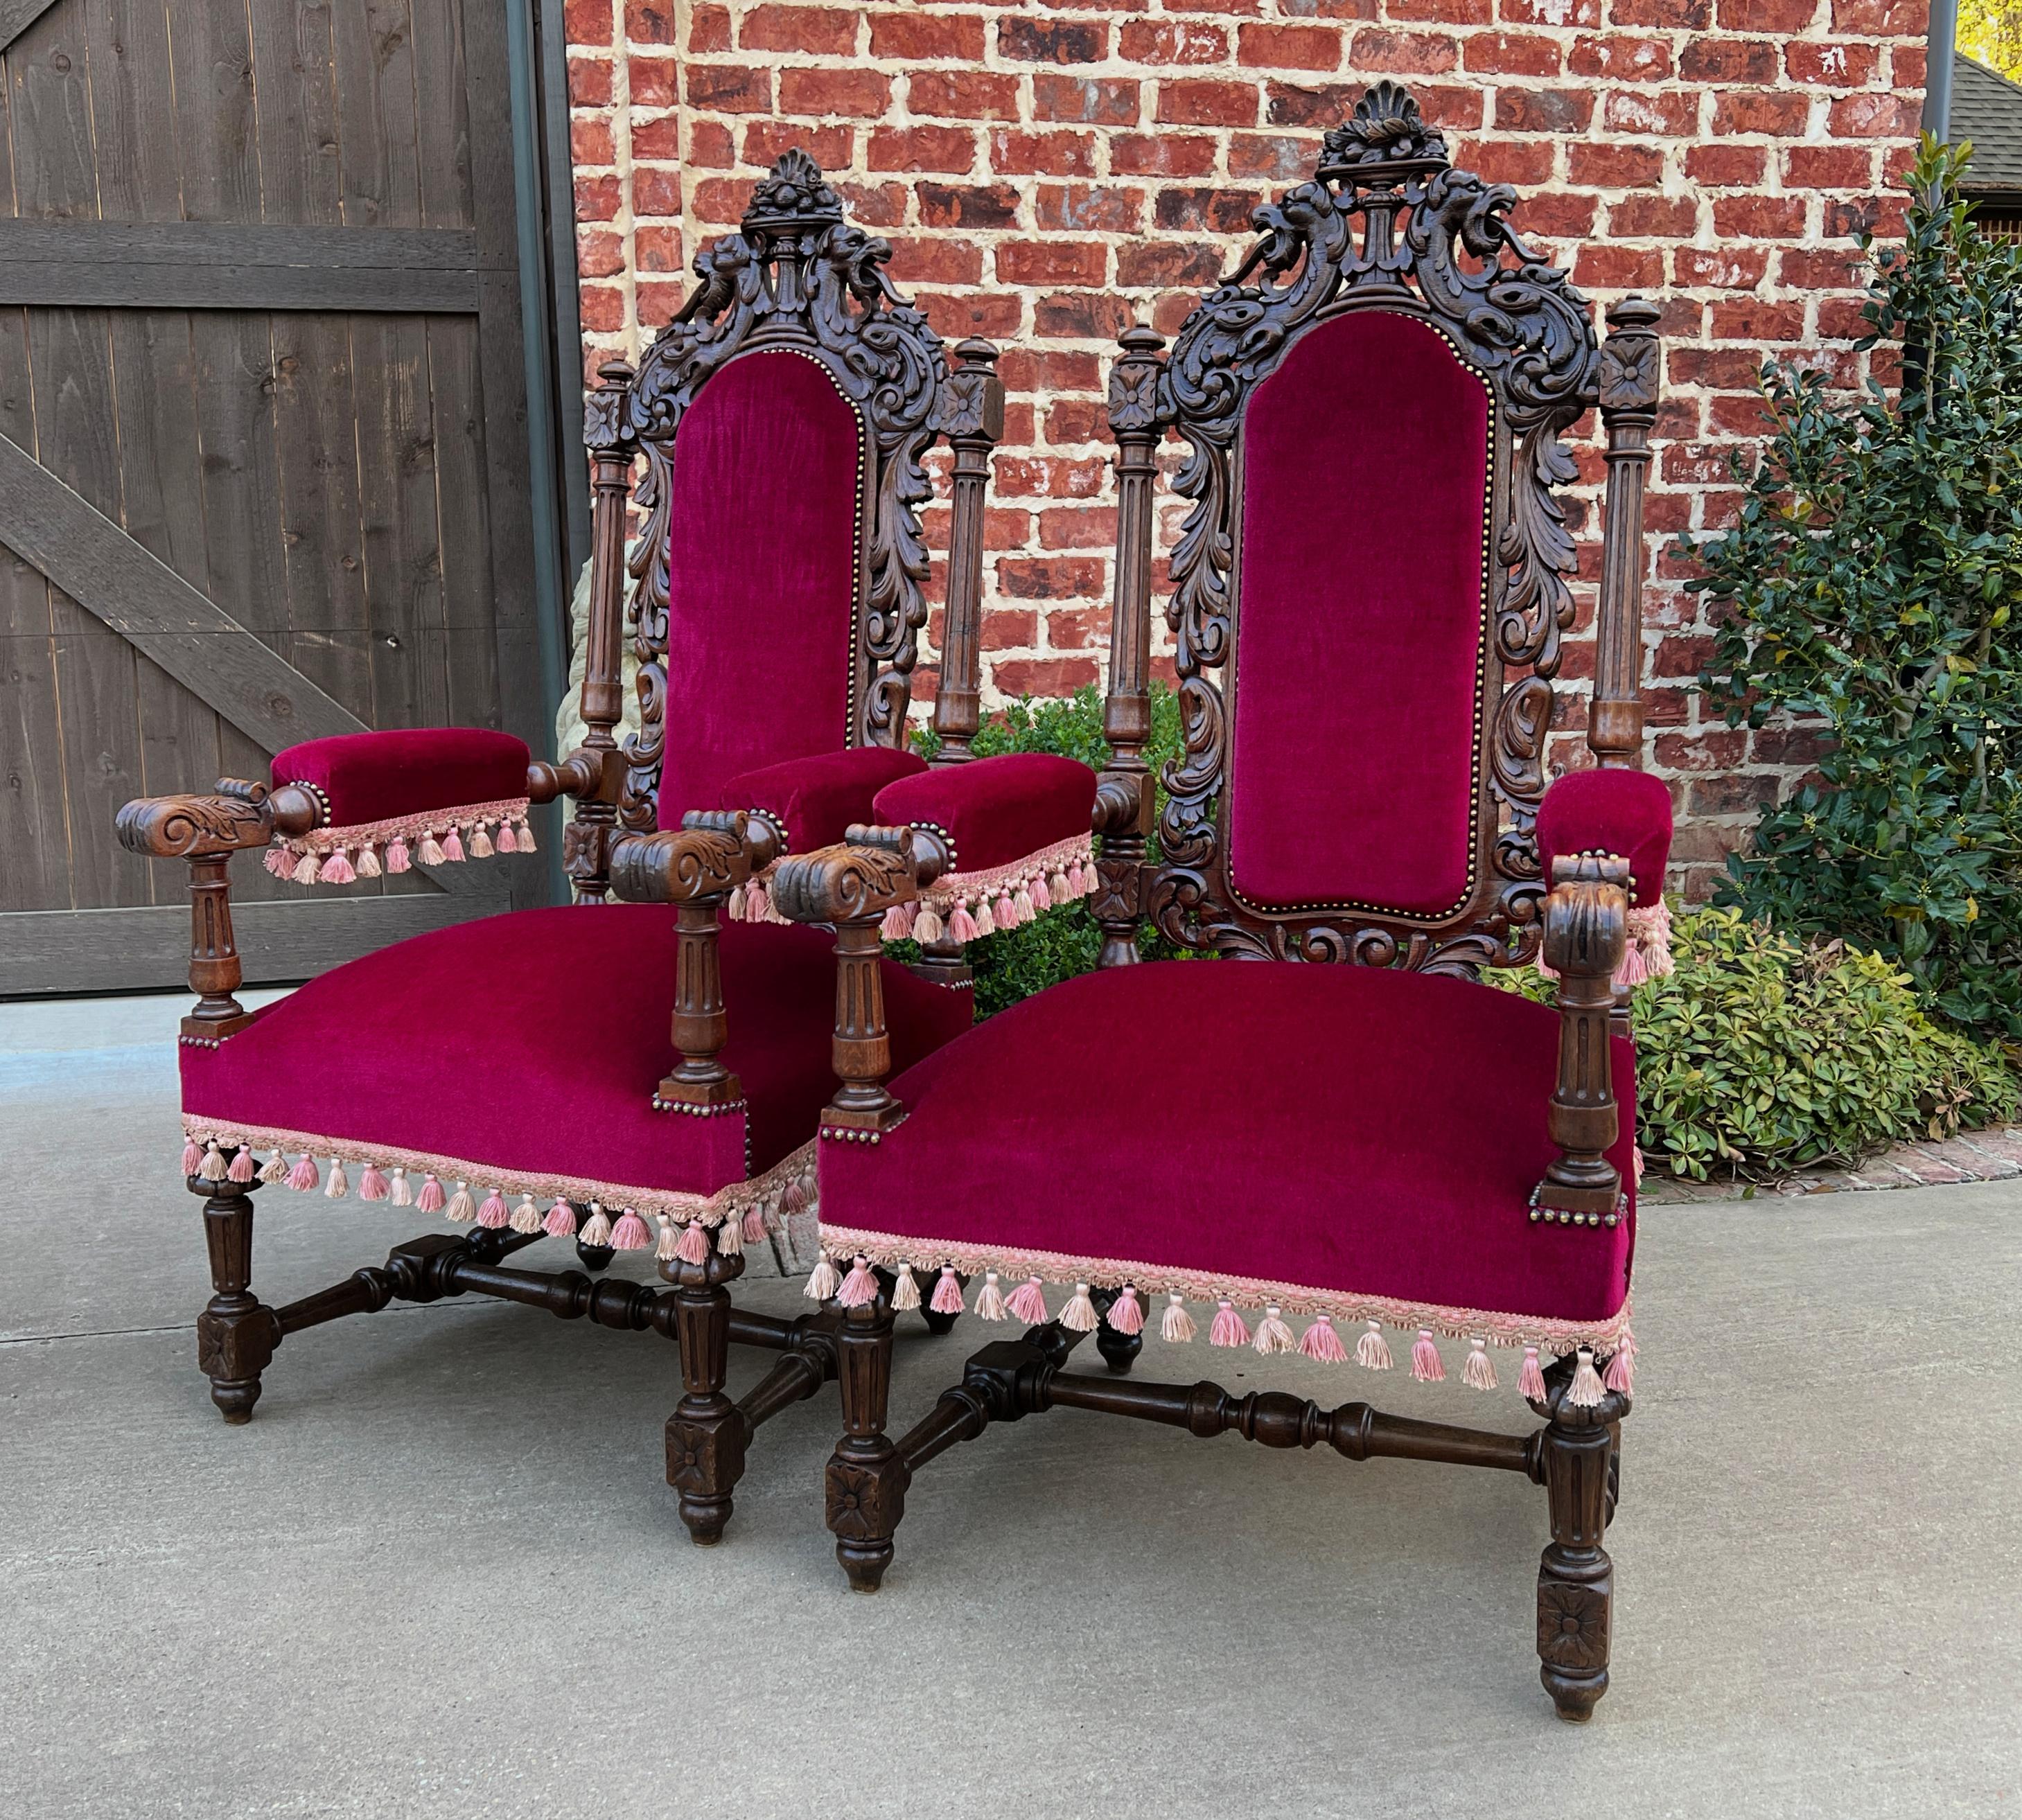 Stunning antique French pair renaissance revival oak upholstered arm chairs throne chairs fireside chairs~~large~~circa 1880s

Classic French charm and style~~stately pair with highly carved backs, arms, and legs

Red velvet or velveteen fabric